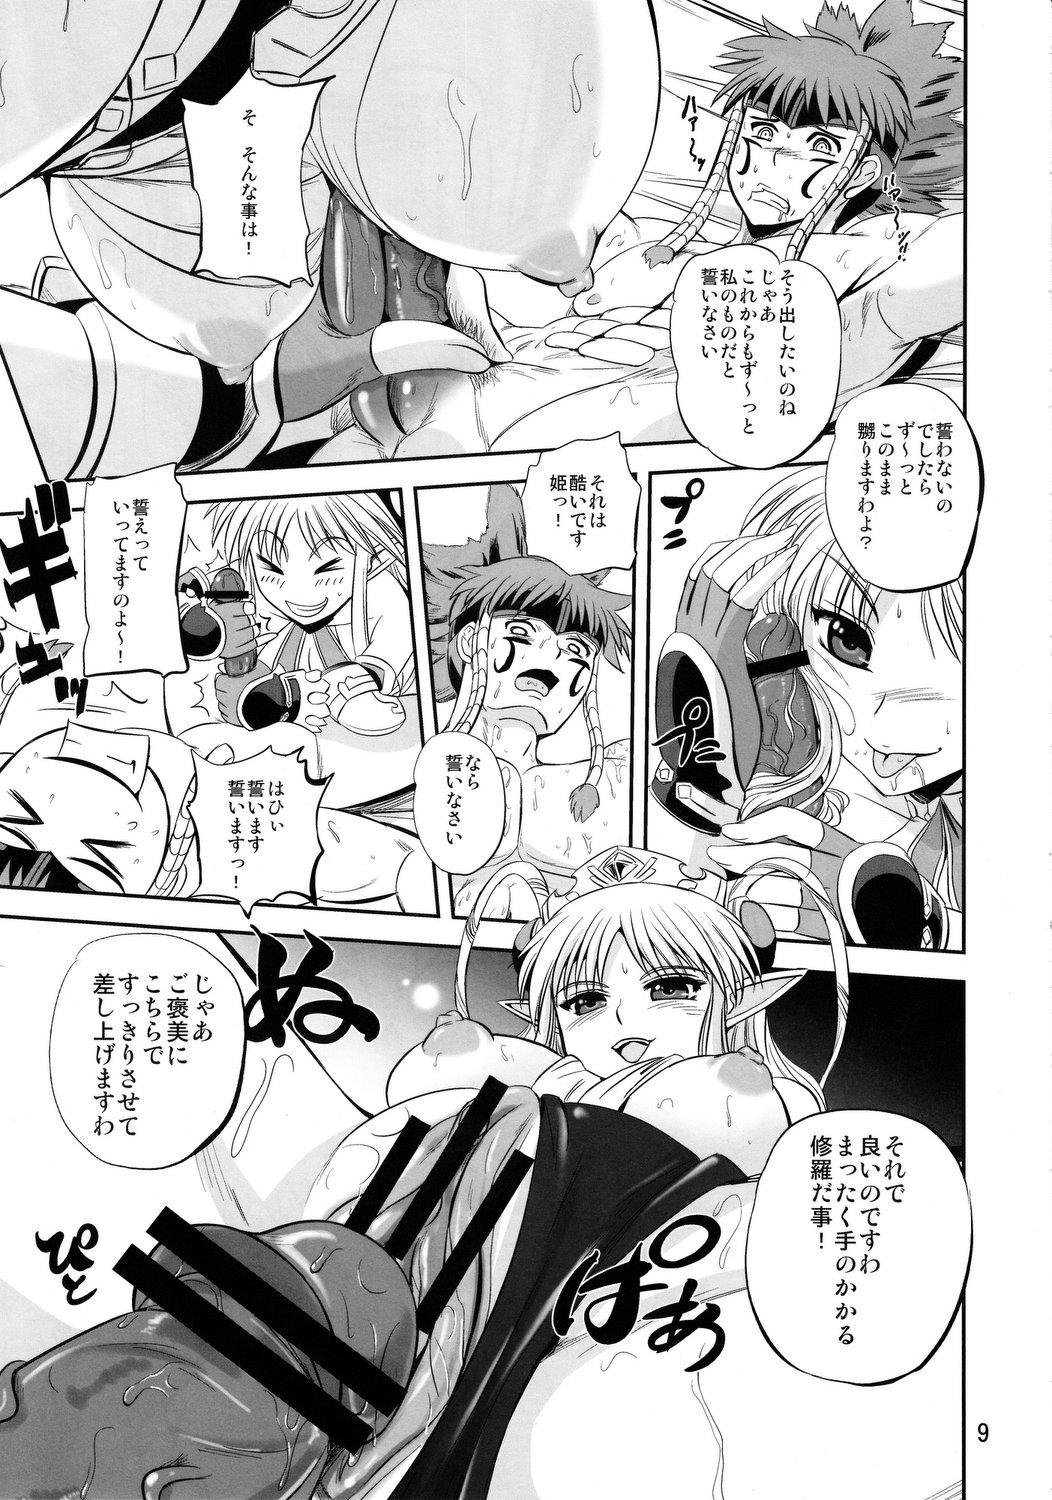 Anal Sex Royal DoS Breaker - Super robot wars Endless frontier Fuck - Page 8